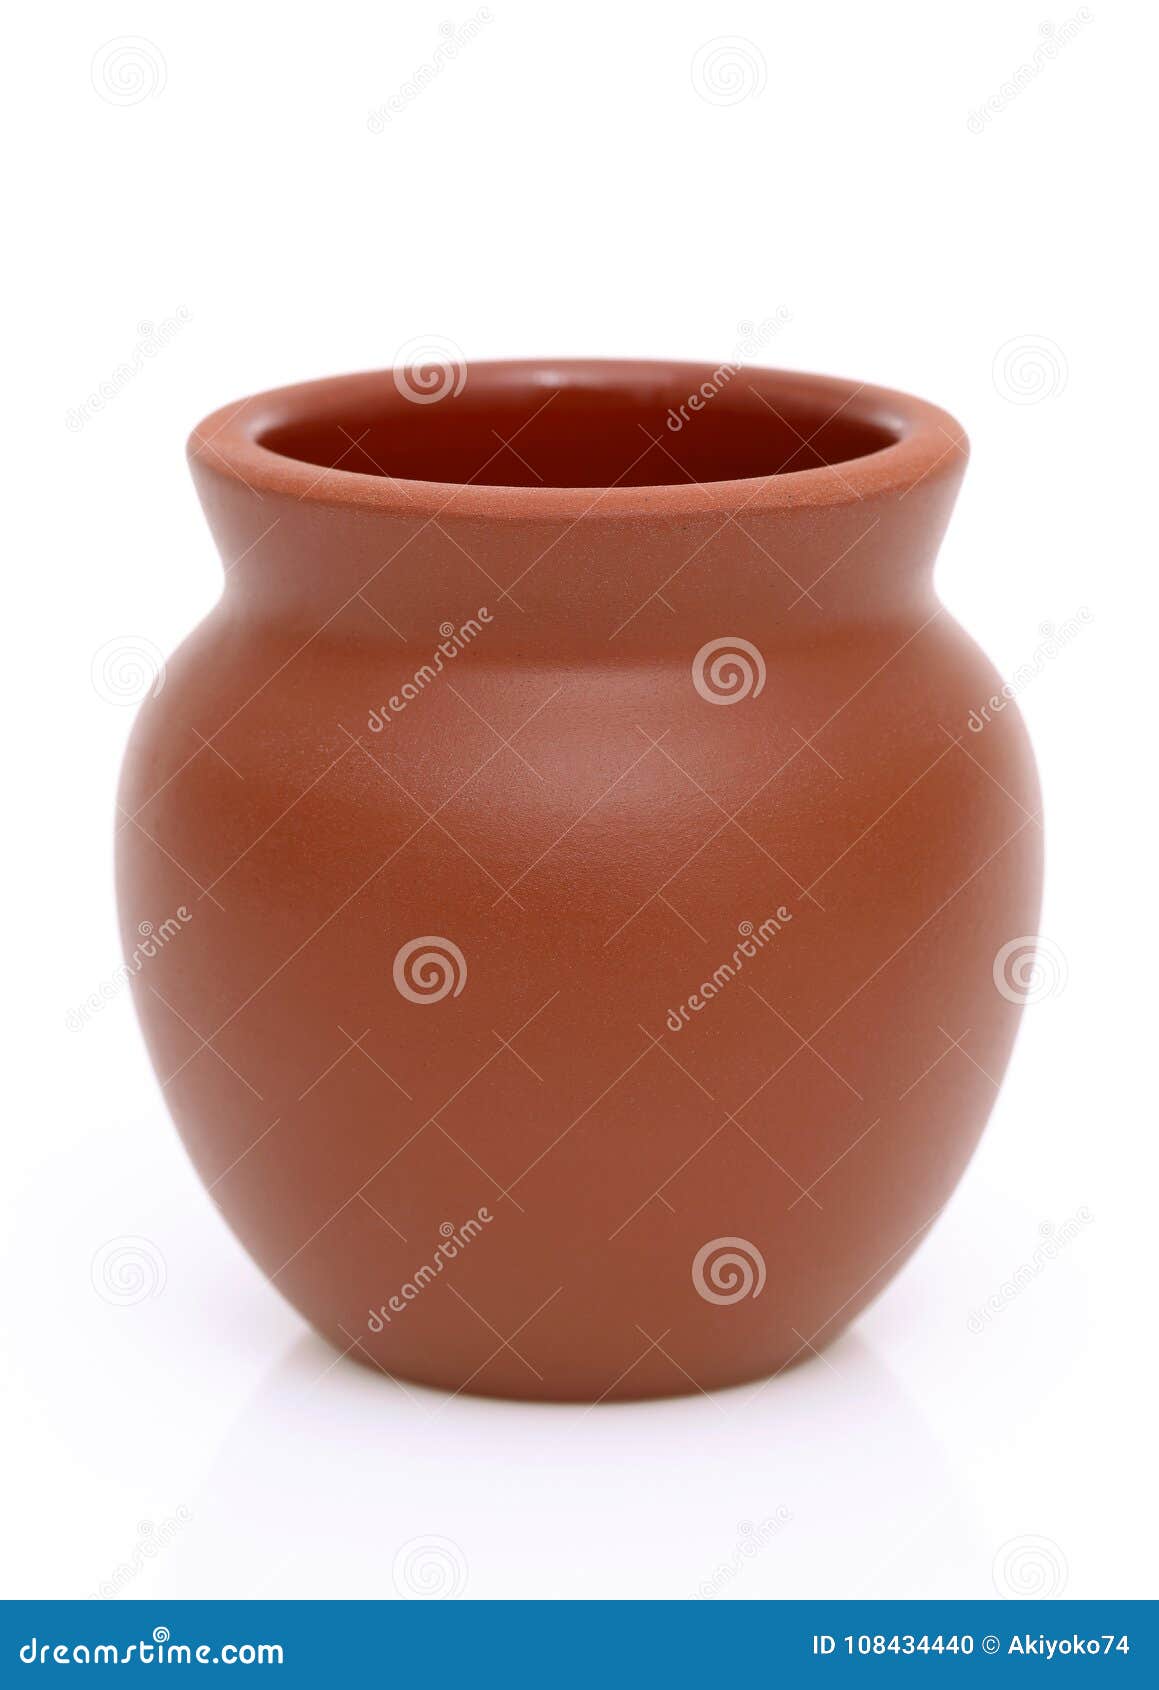 Clay Water Pot stock photo. Image of decorative, asia - 153337808